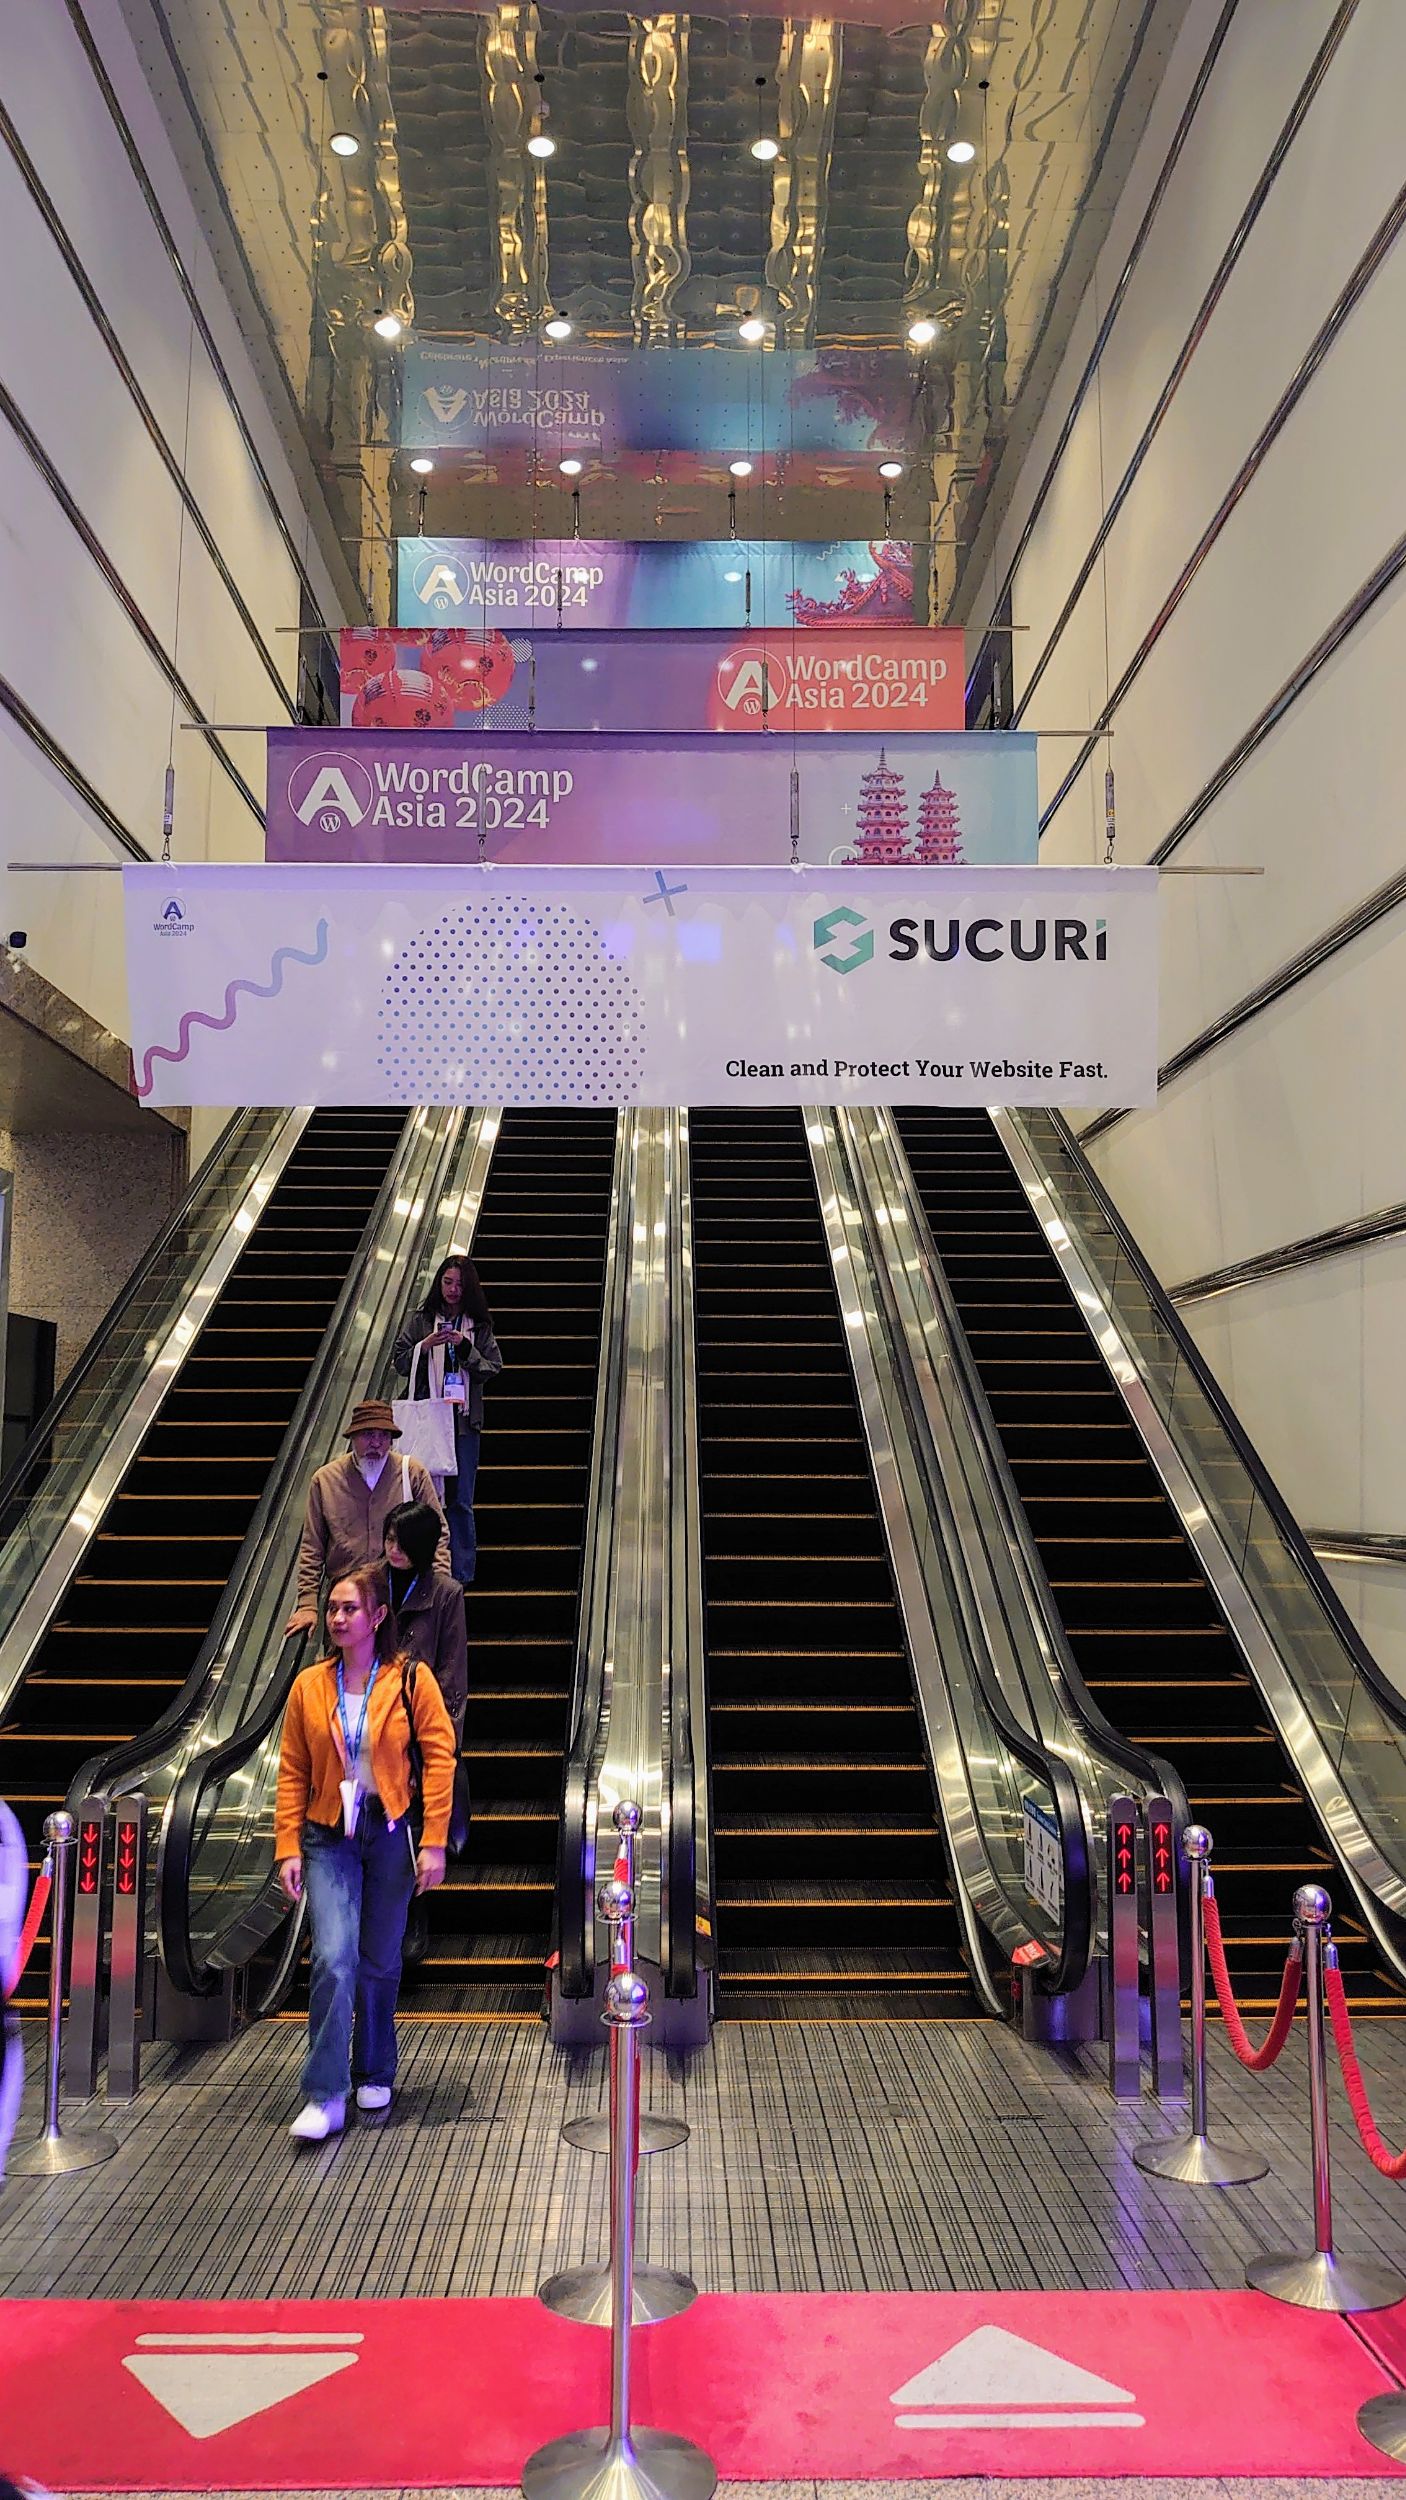 Sponsor add-ons - Hanning banners on escalators - one for Sucuri